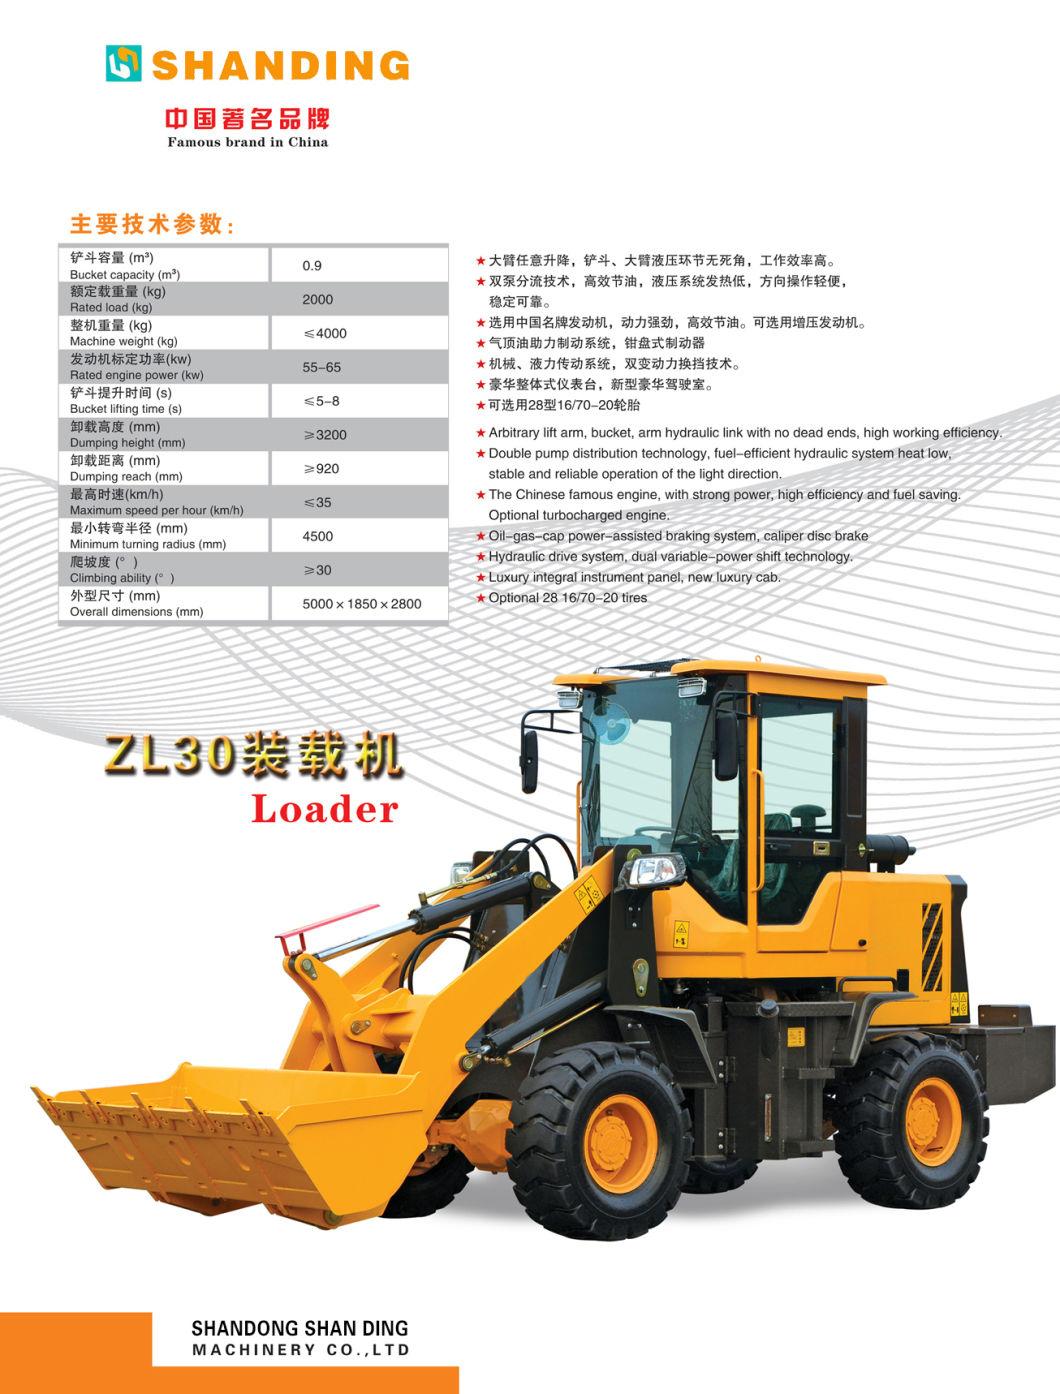 Shanding Zl30 2 Ton Compact Equipment 4 Wheel Drive Small Mini Wheel Loaders by CE